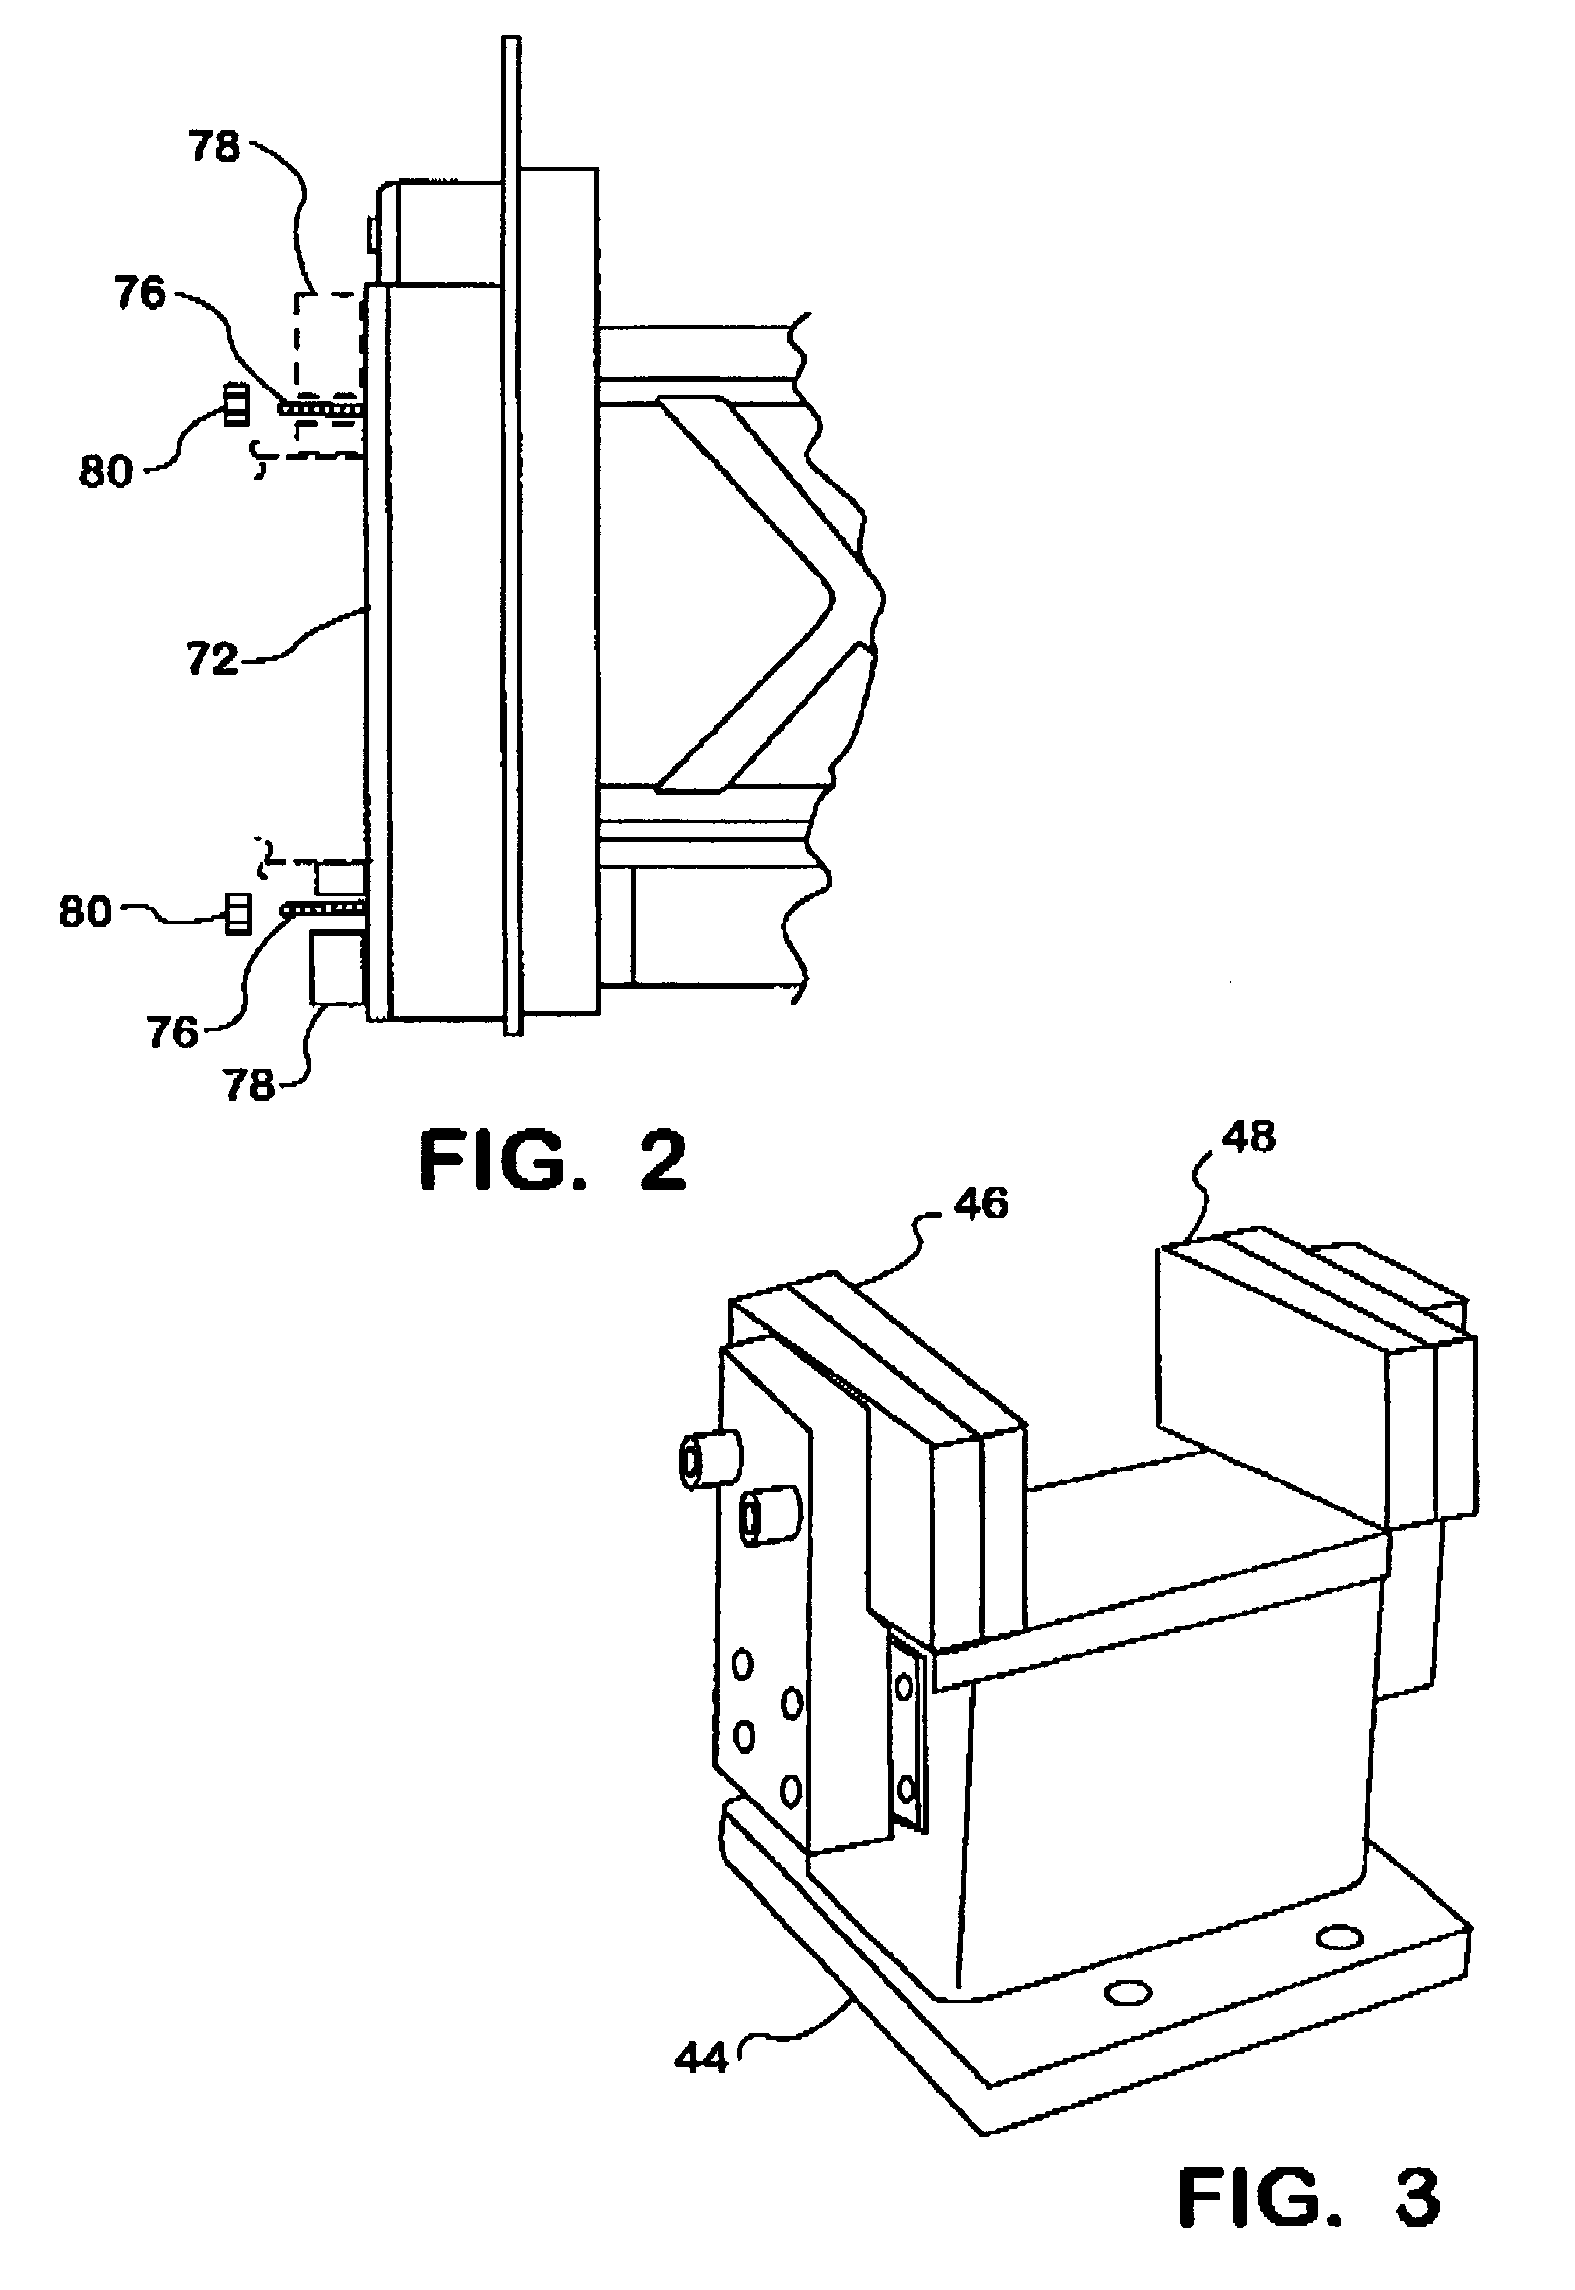 Automated system and method for probe measurement of stack gas flow properties